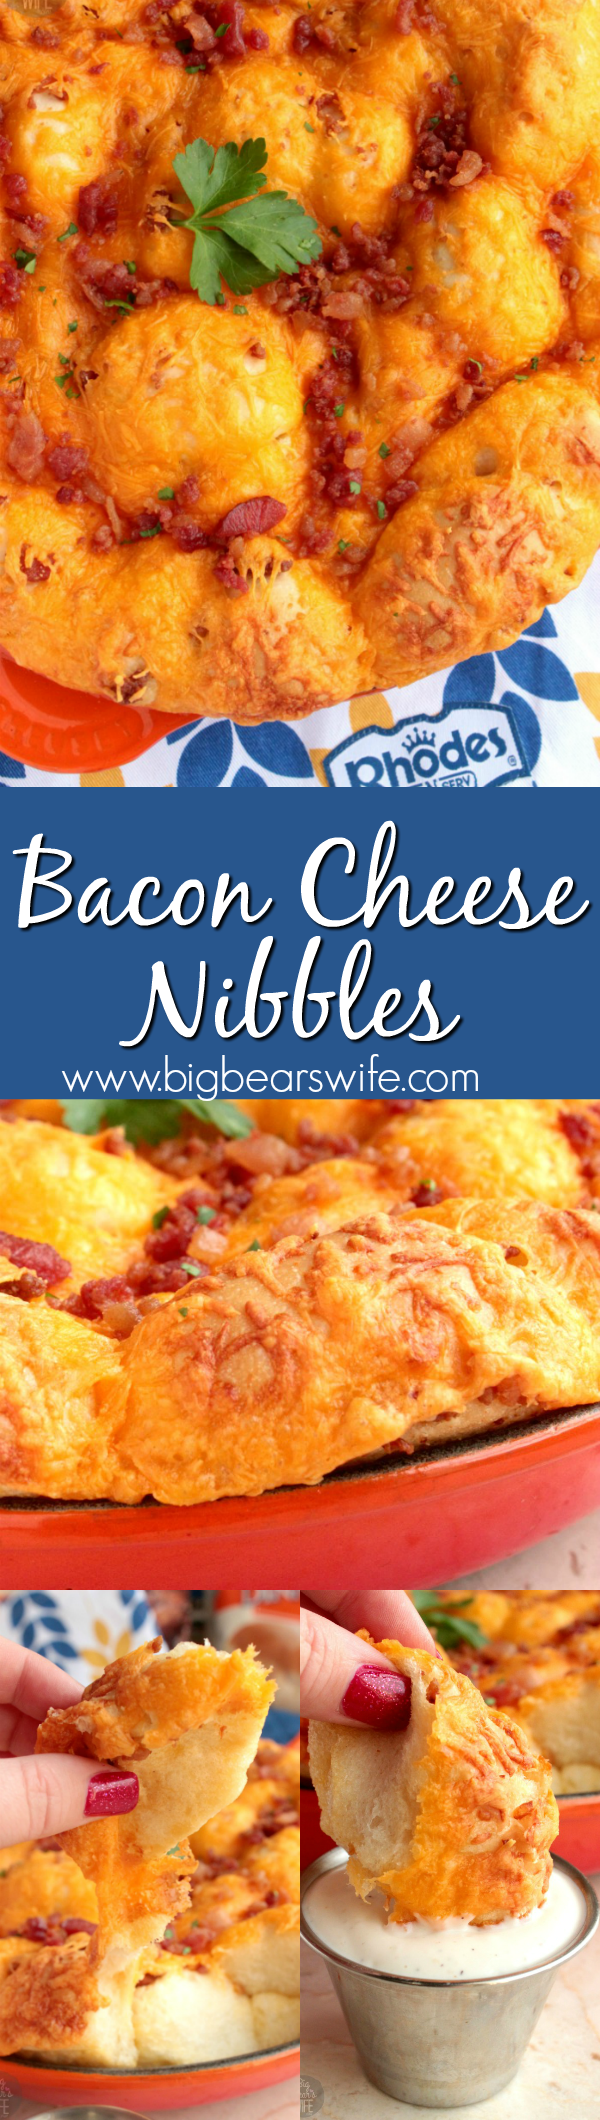 Bacon Cheese Nibbles are fluffy bites covered in melted cheese and crispy bacon! Perfect for dipping into ranch or your favorite dipping sauce!